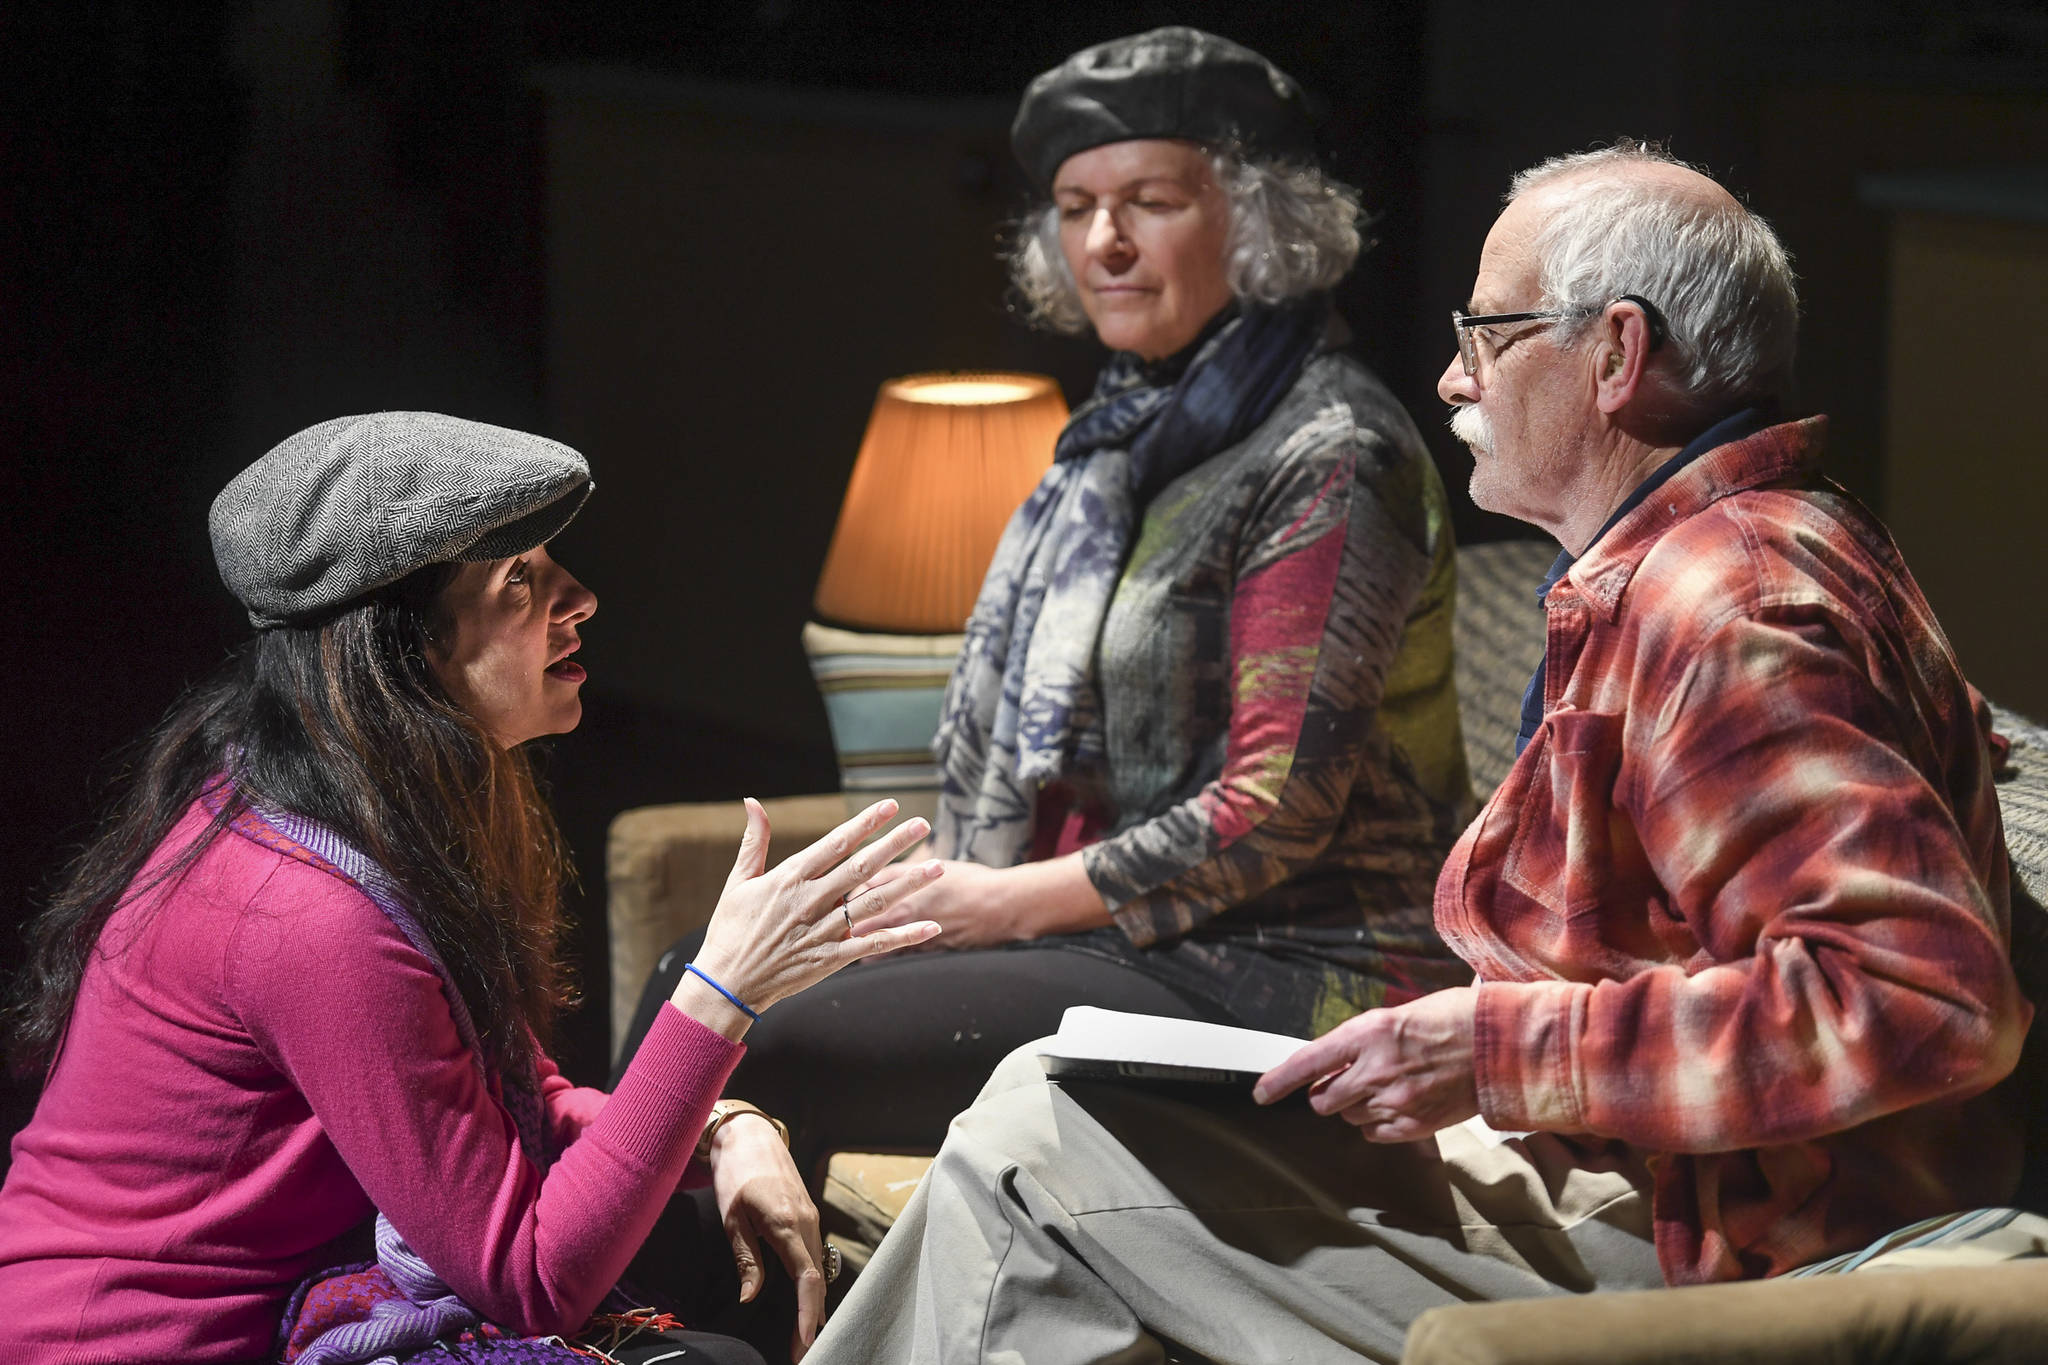 Director Alicia Dhyana House, left, speaks with Charlie Cardwell, playing Clifford, Angelina Fiordellisi, playeing Minnie, as they rehearse in Perseverance Theatre’s production of “With” by playwright Carter Lewis on Tuesday, Nov. 19, 2019. “With” opens Friday Nov. 22 and runs through Dec. 15. (Michael Penn | Juneau Empire)